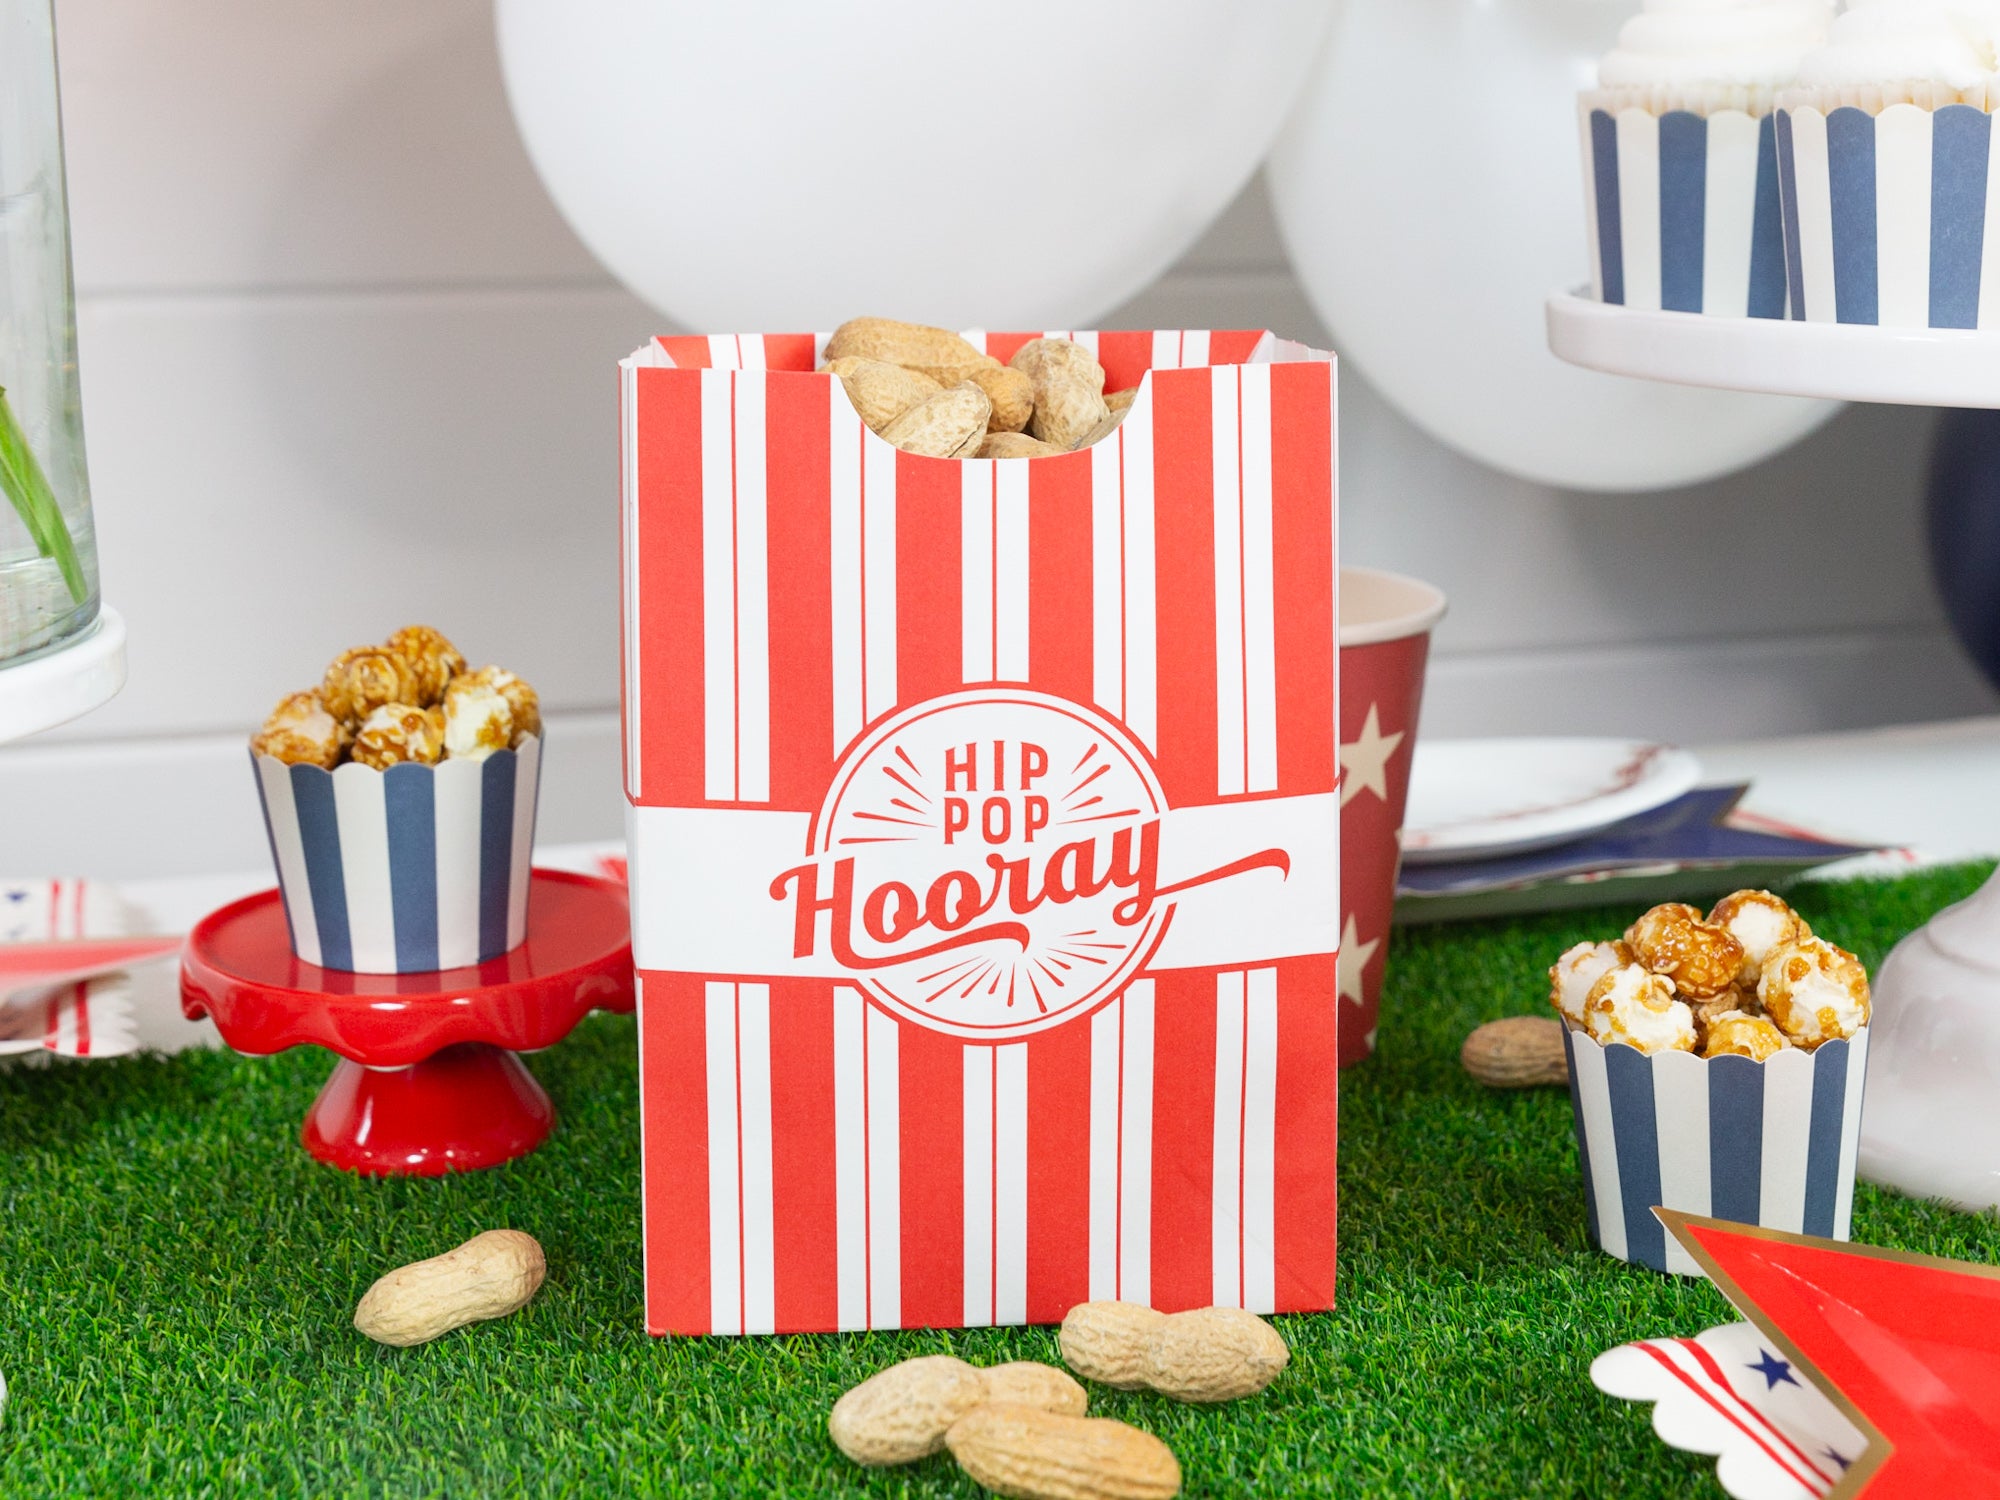 Home Run Peanuts in Popcorn Bag | The Party Darling